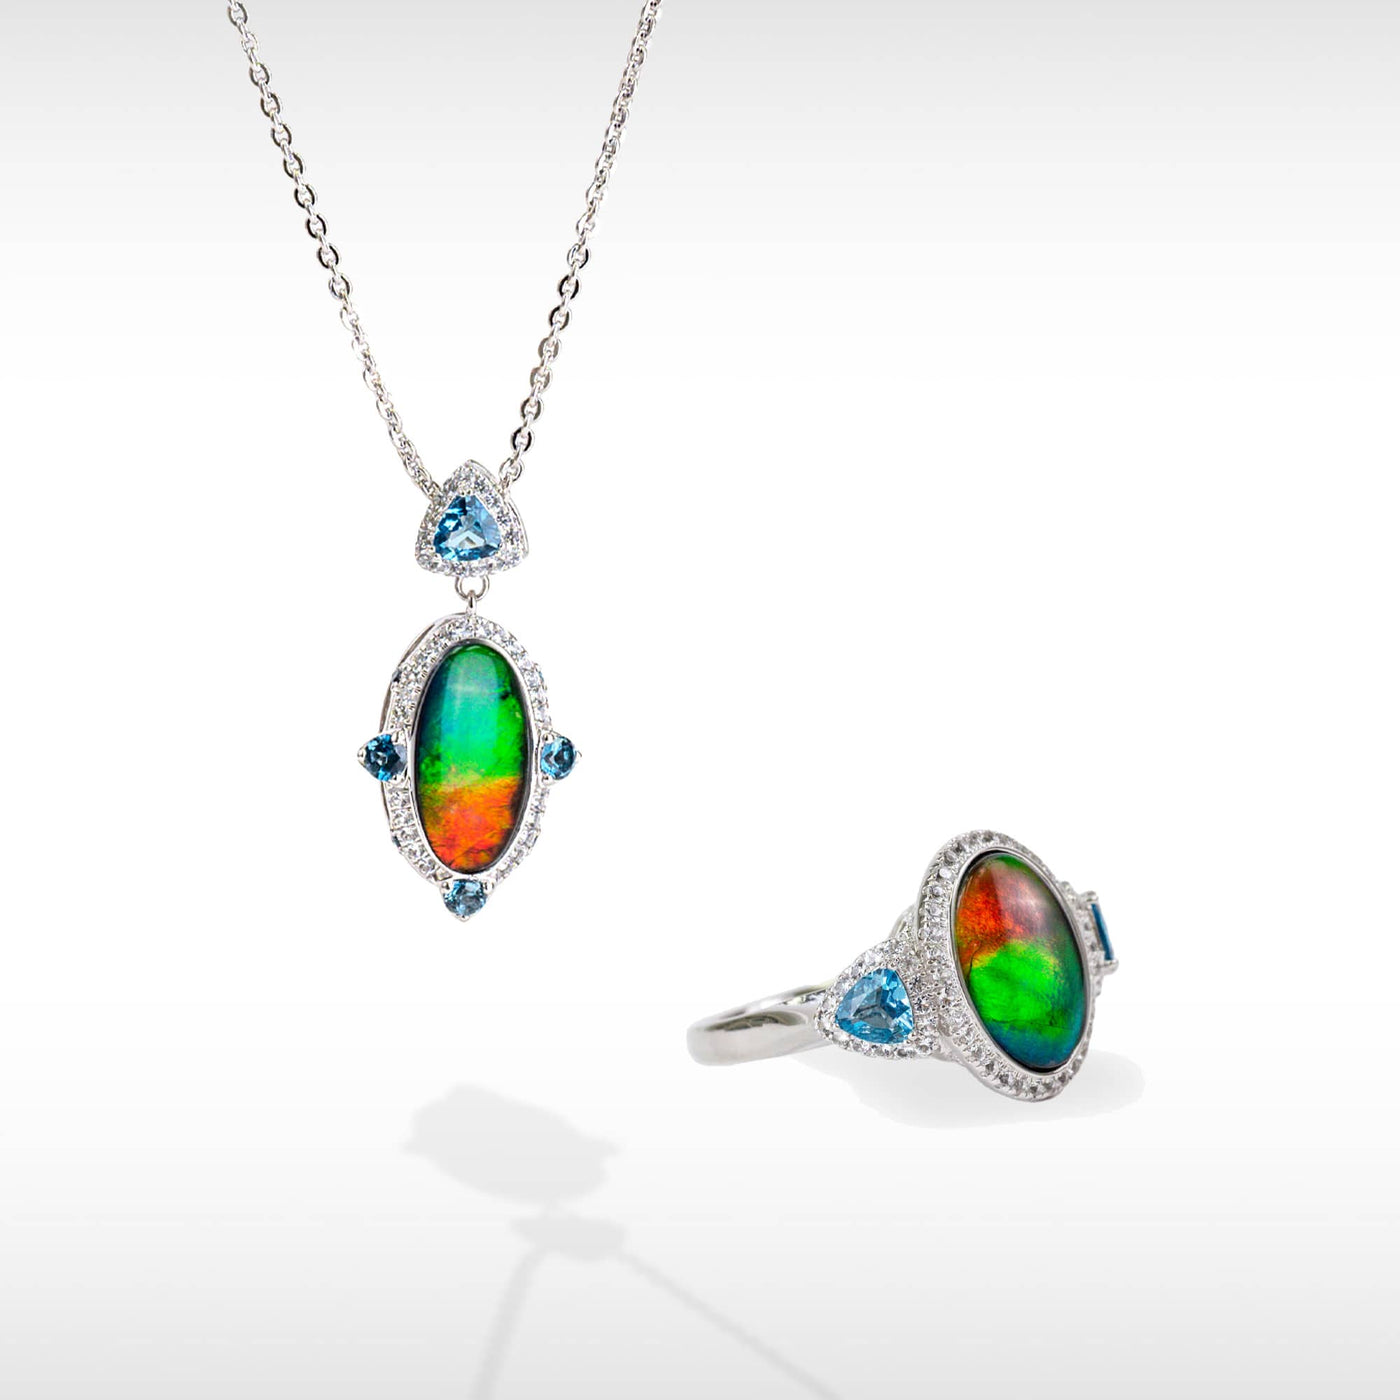 Lavish ammolite pendant and ring set in sterling silver